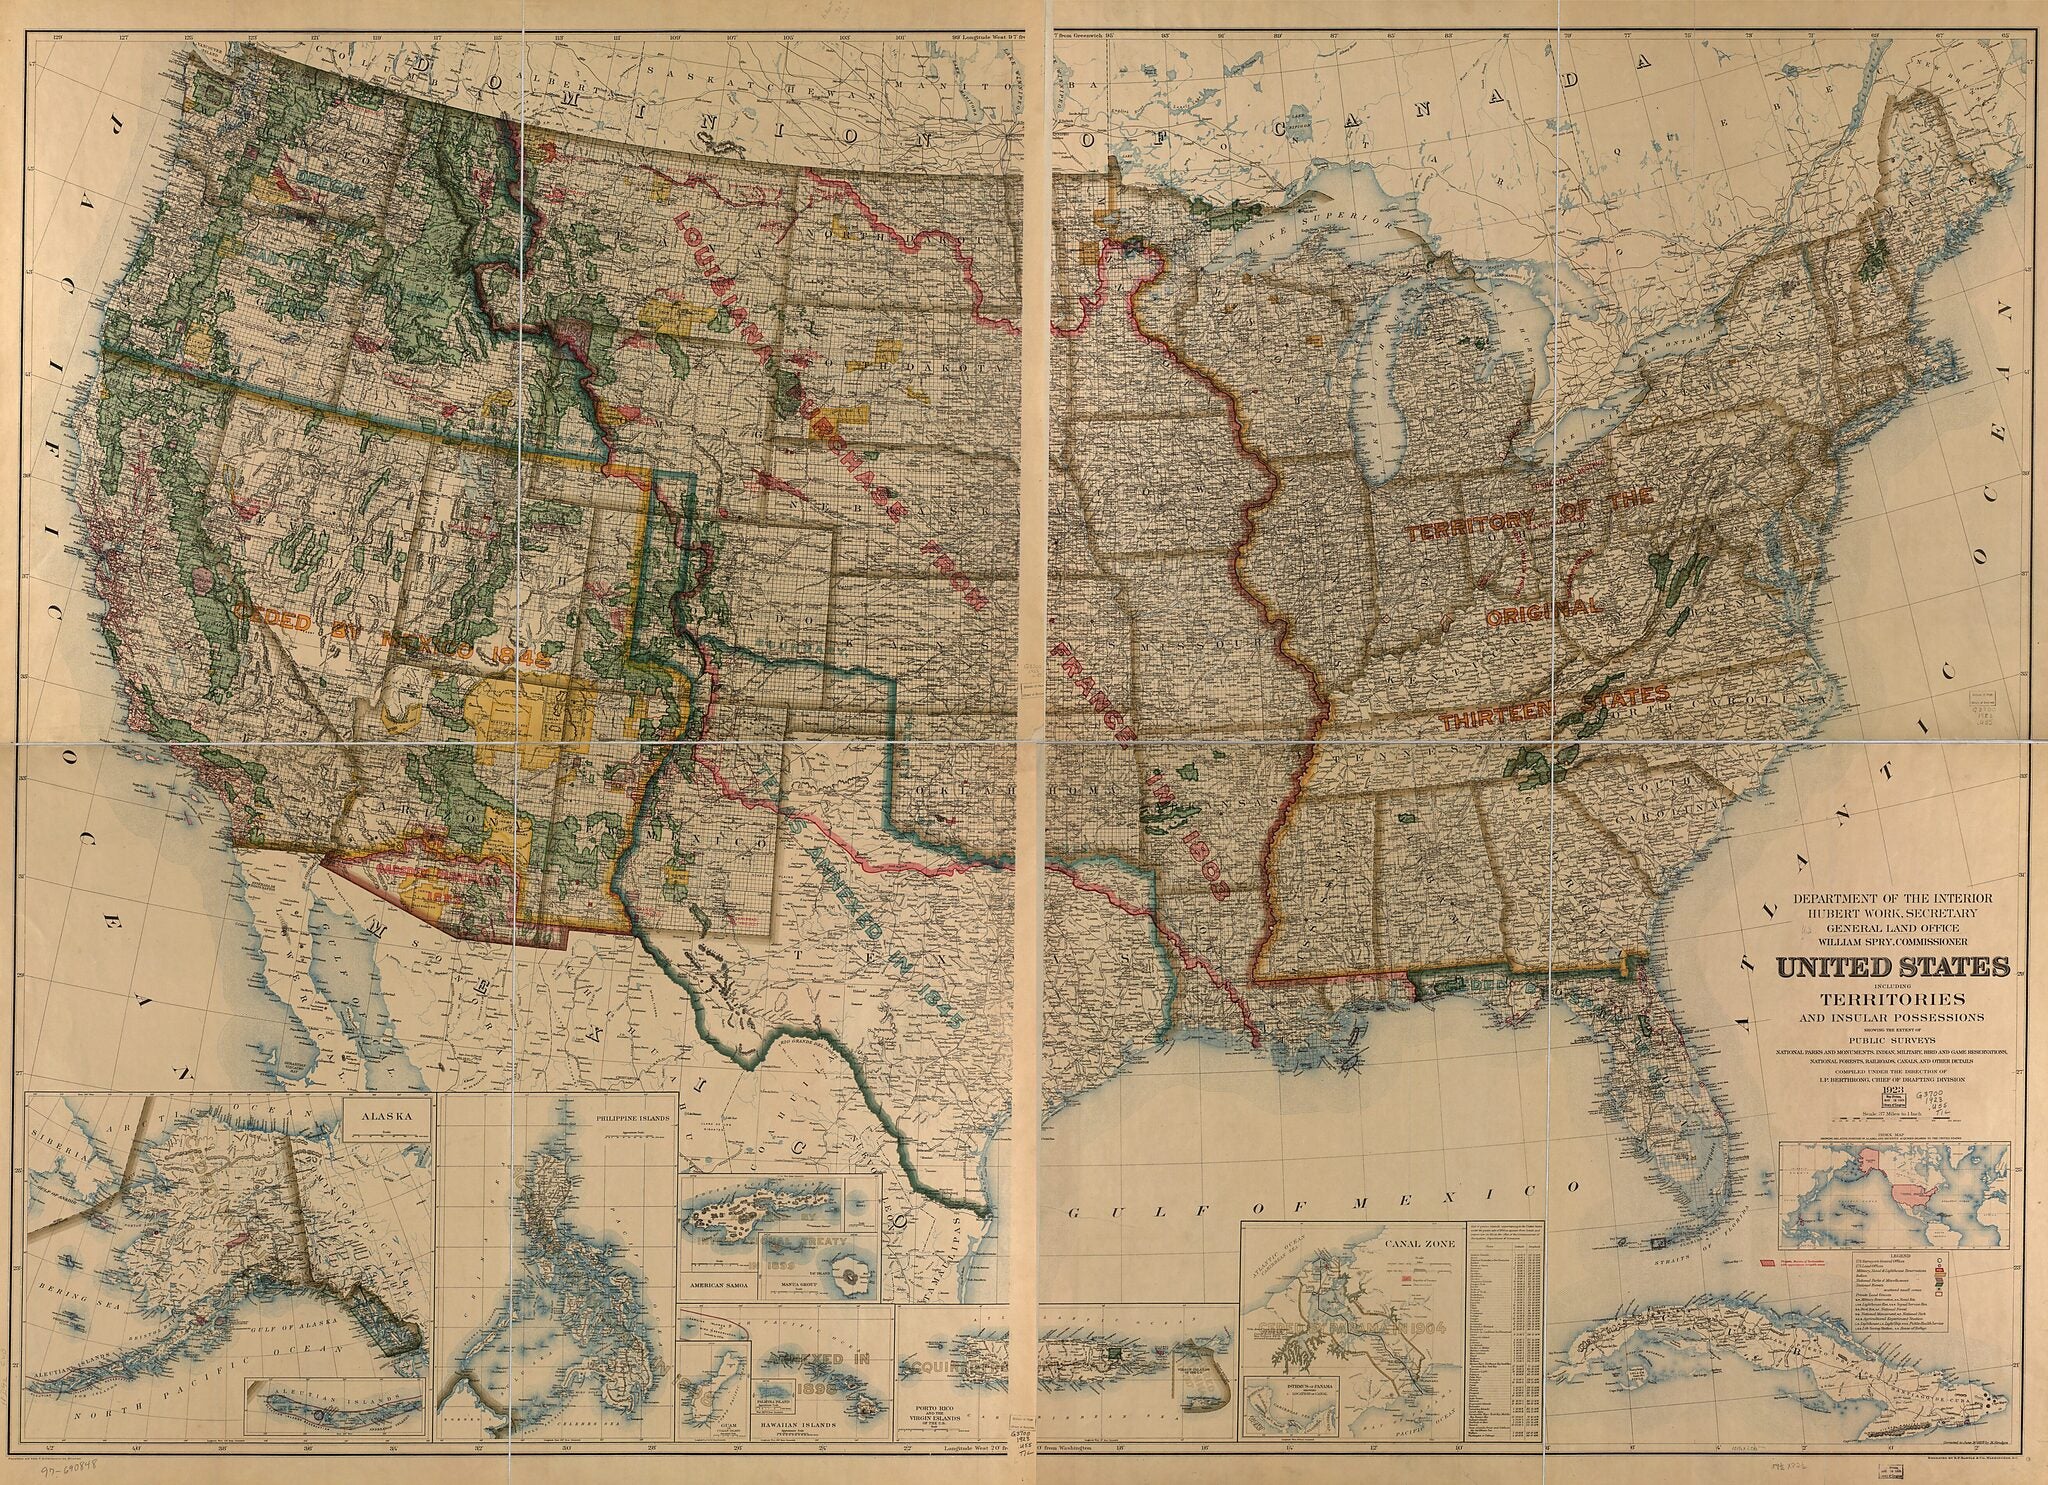 This old map of United States Including Territories and Insular Possessions : Showing the Extent of Public Surveys, National Parks and Monuments, Indian, Military, Bird and Game Reservations, National Forests, Railroads, Canals and Other Details from 192